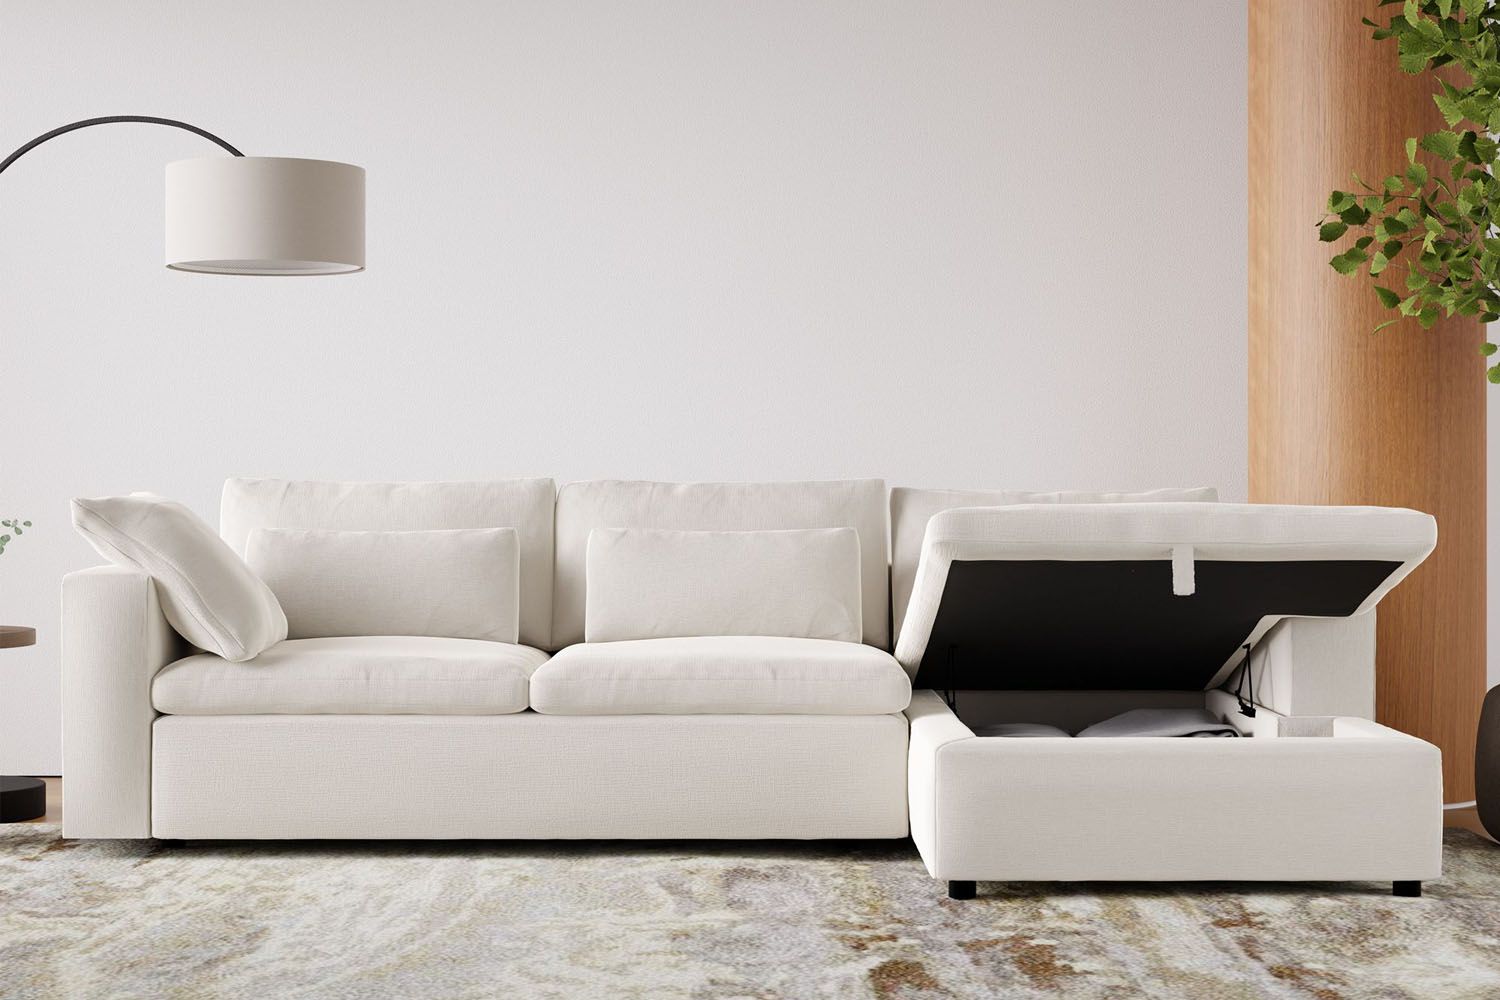 Sectional Sofas With Storage For Families: 10 Easy Pieces Intended For Sofa Sectionals With Storage (Photo 5 of 15)